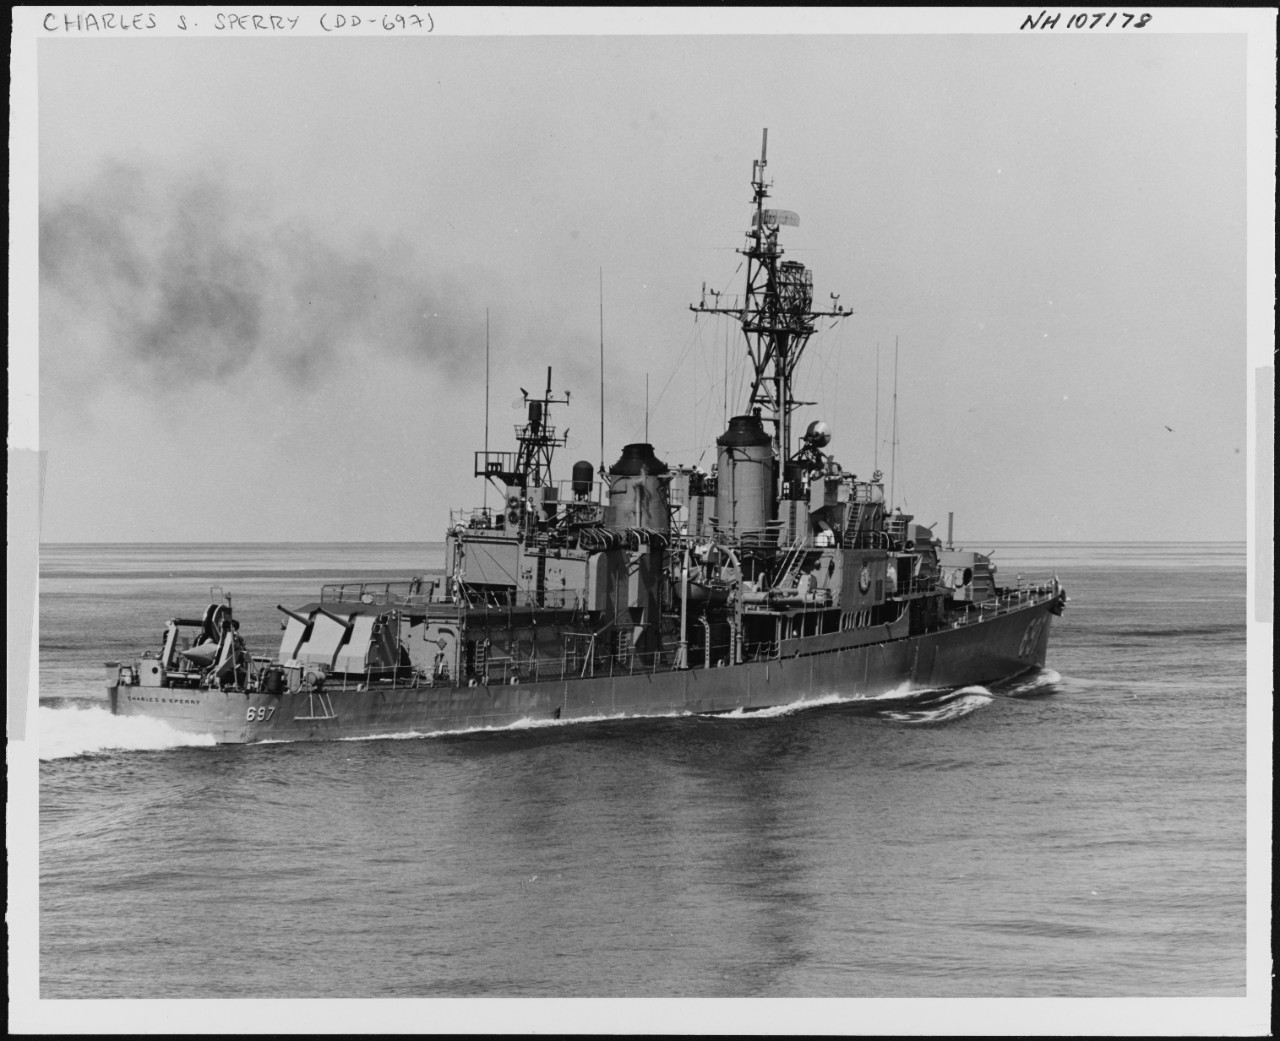 Photo #: NH 107178  USS Charles S. Sperry